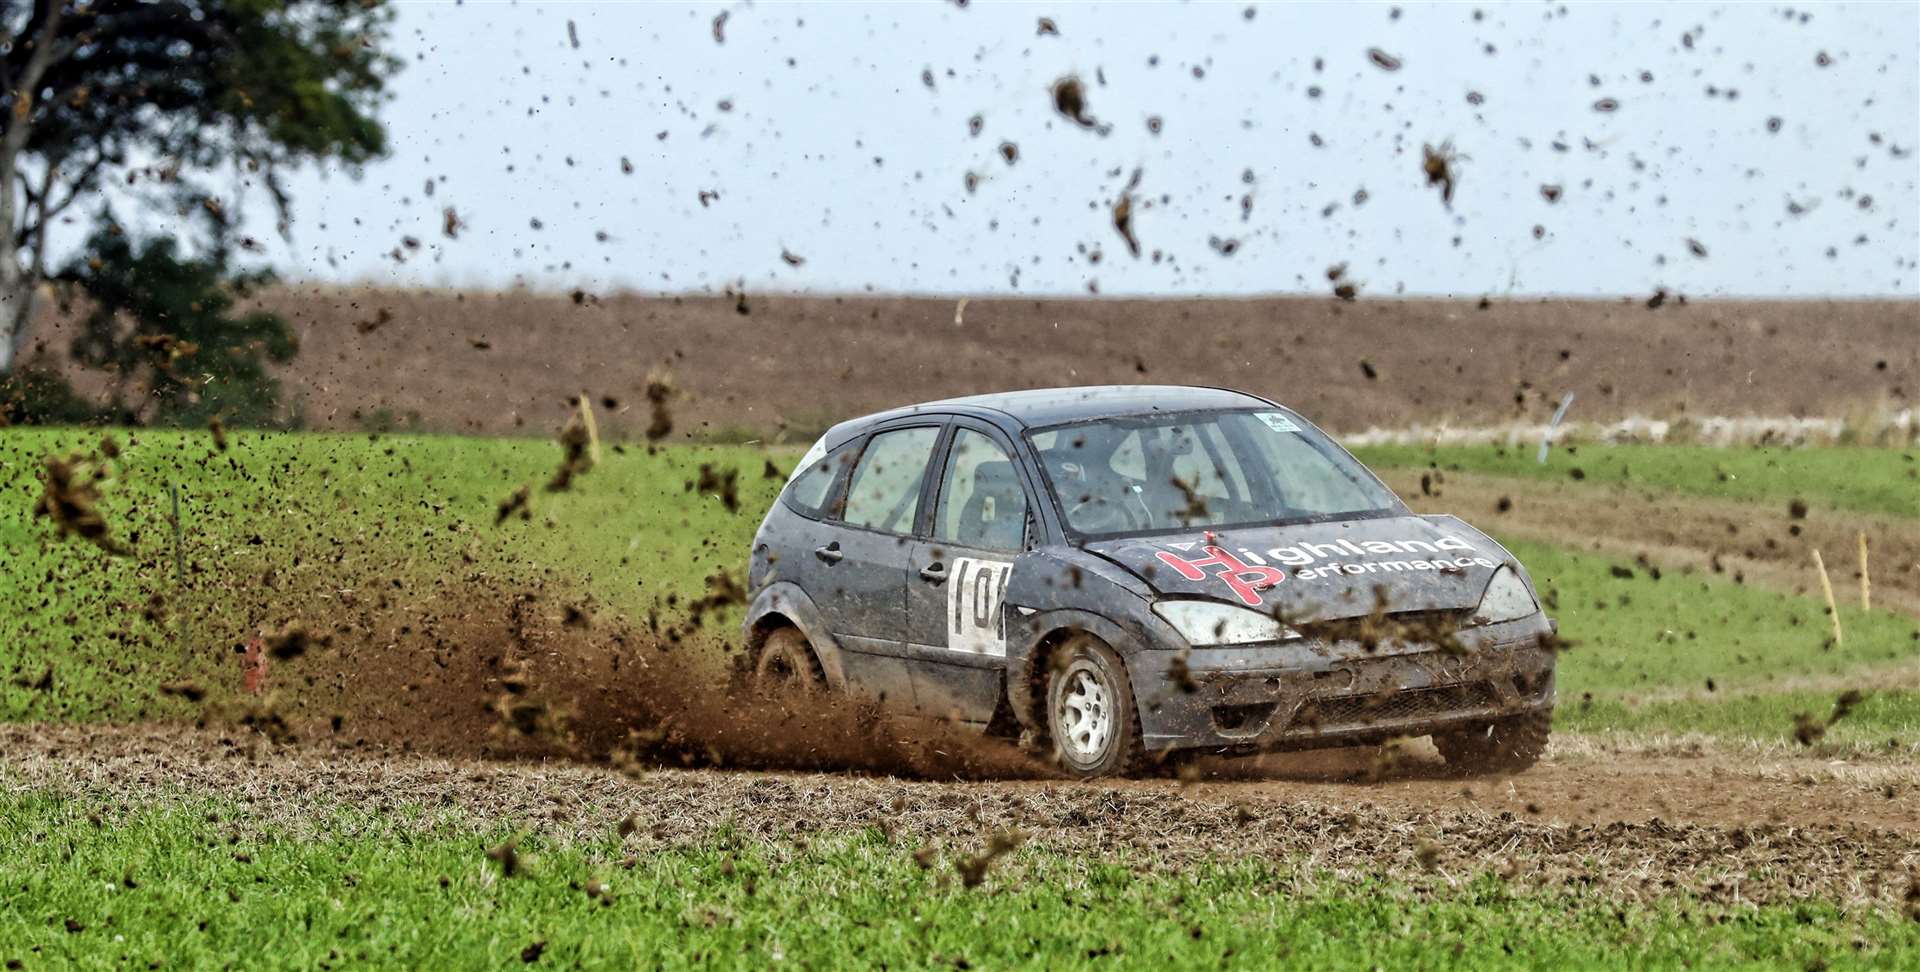 George Coghill Jnr battles his way through a spray of mud in his Ford Focus during a earlier round. Picture: James Gunn